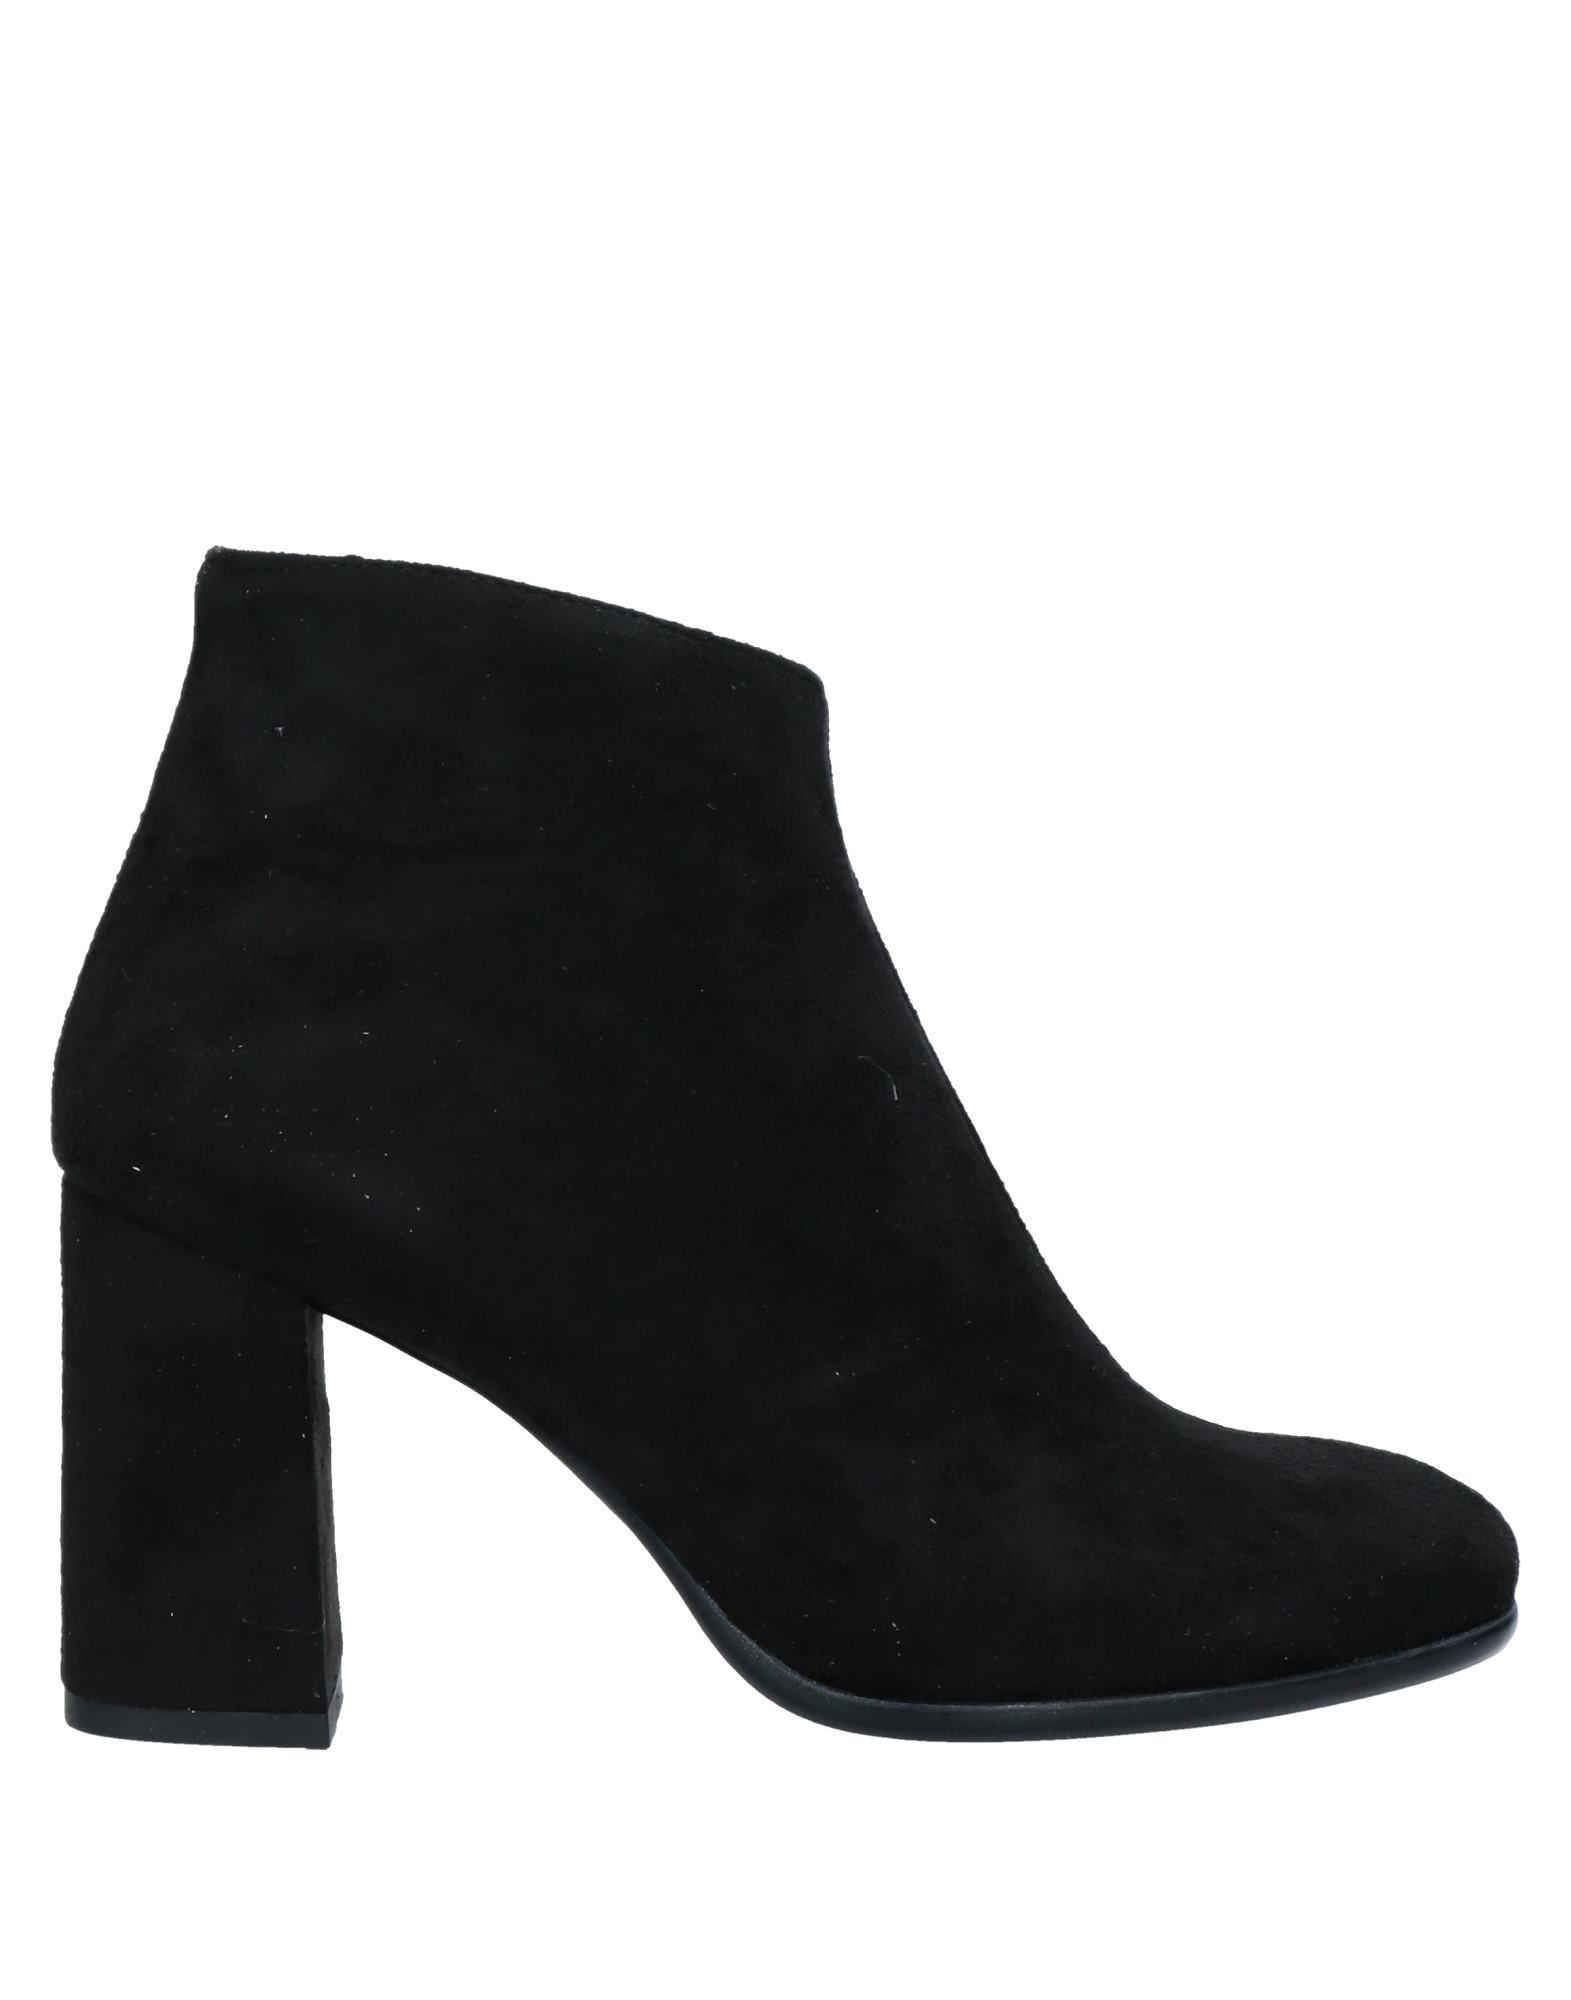 Tsd12 Ankle Boots In Black